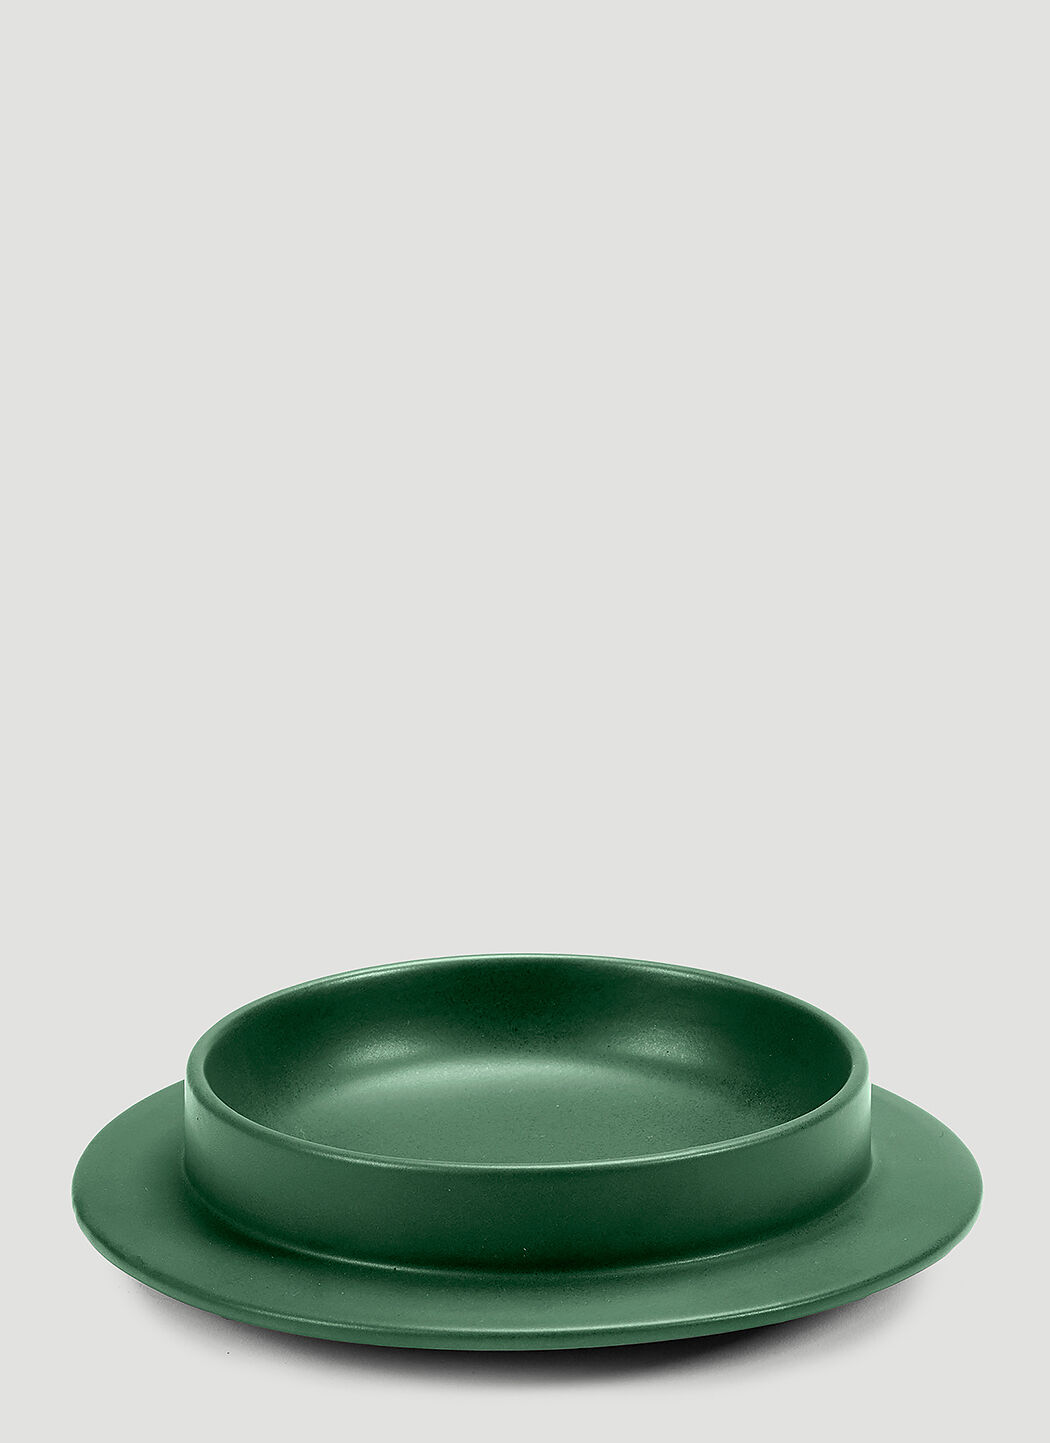 Valerie_objects Dishes to Dishes Plate Green wps0642284